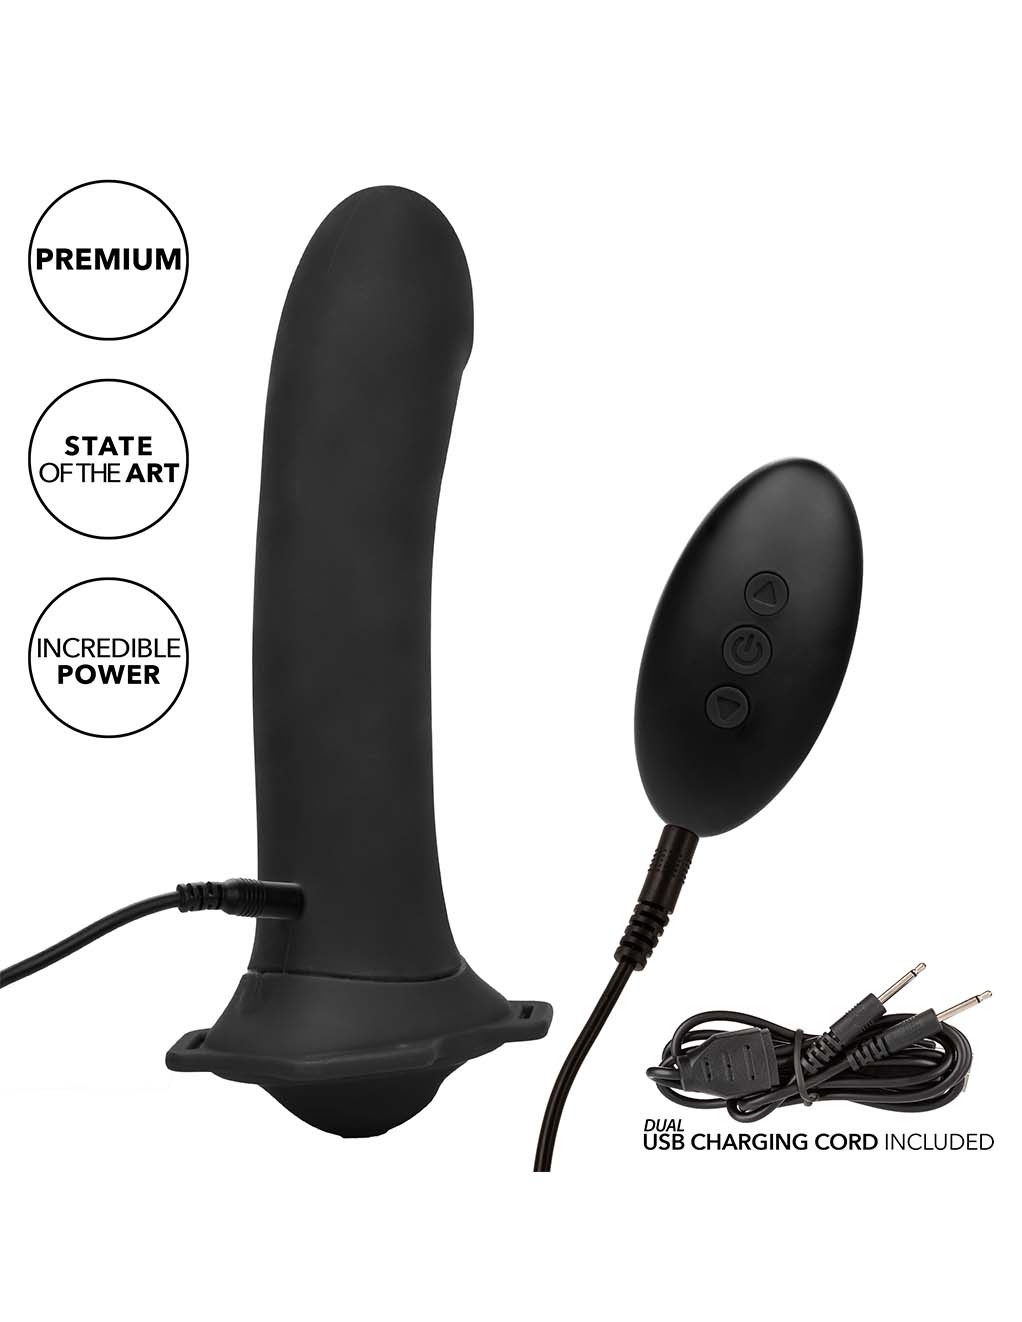 Her Royal Harness Me2 Remote Rumbler- Charger